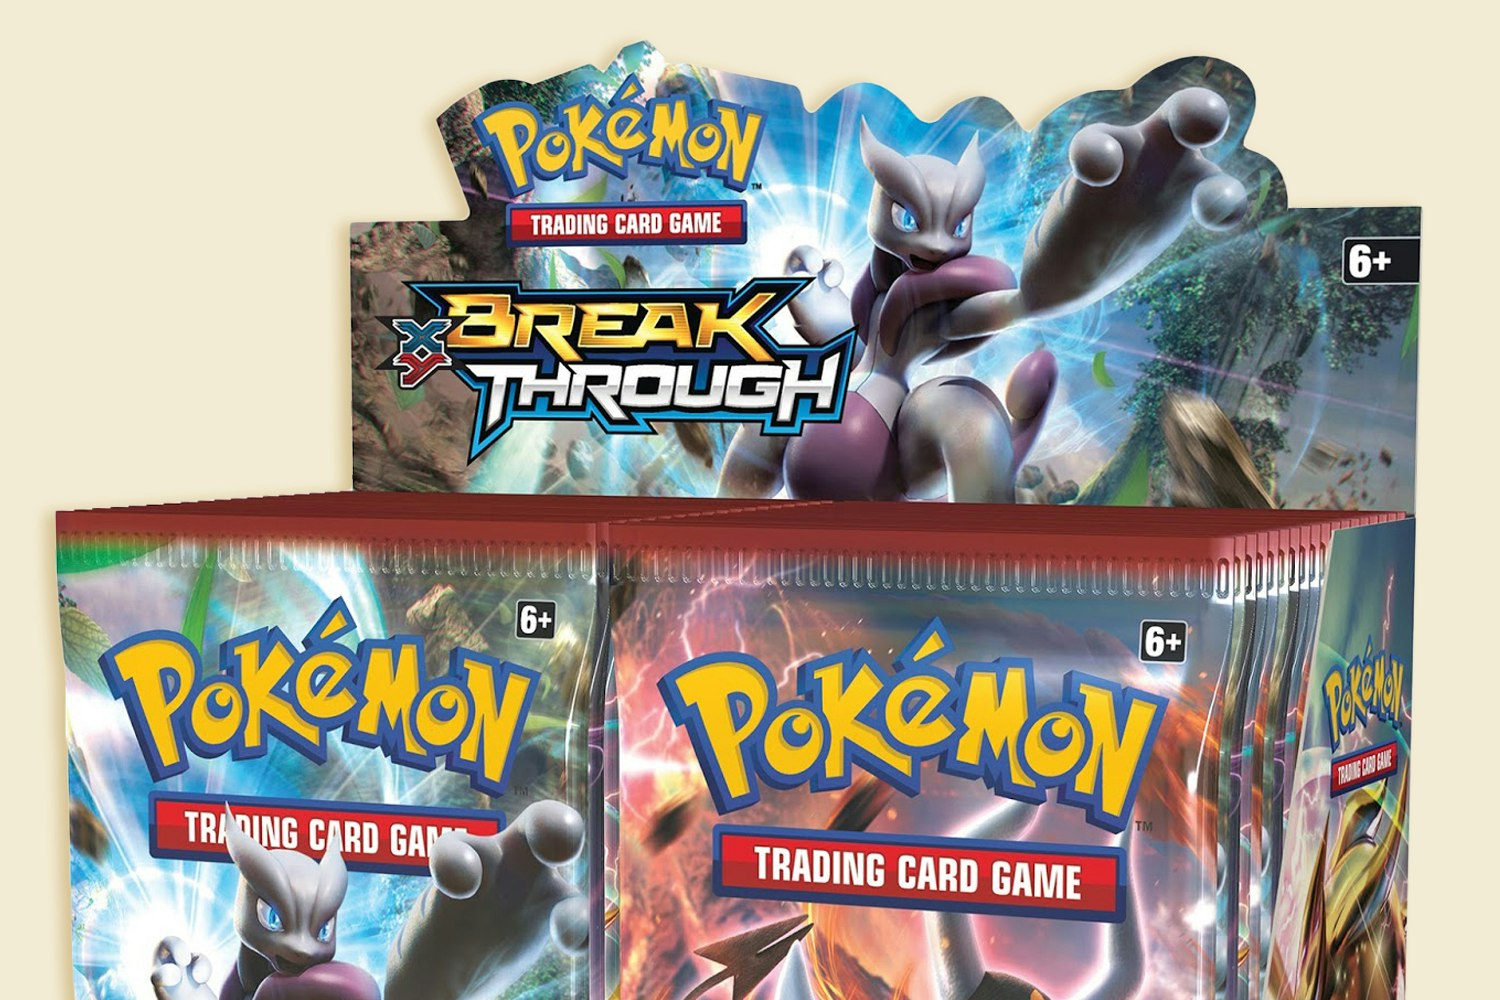 New And SealedMewtwo cover Artwork Pokemon XY Breakthrough Booster Pack 